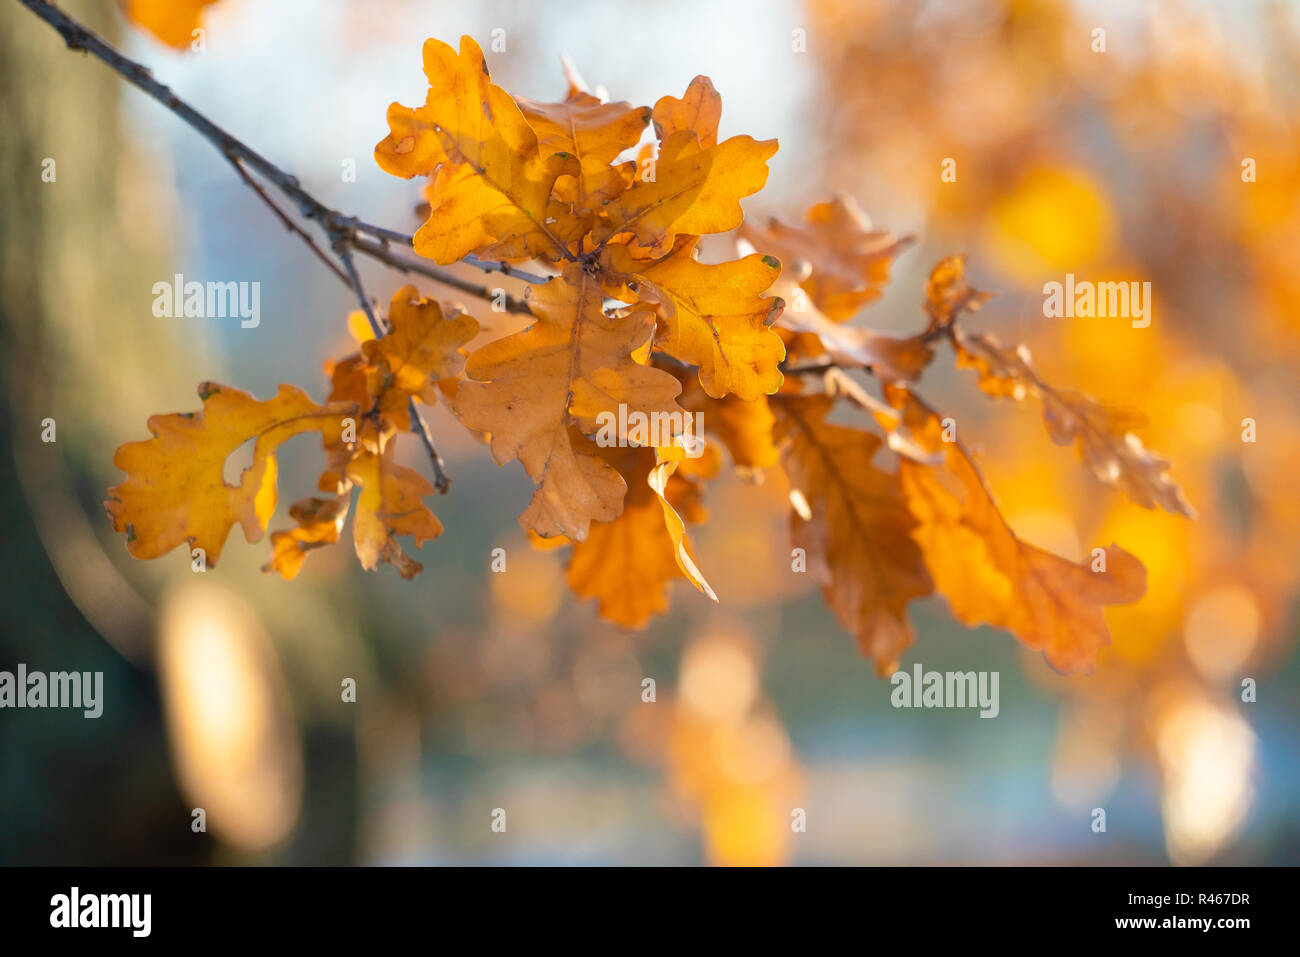 Tree branches with yellow autumn leaves Stock Photo